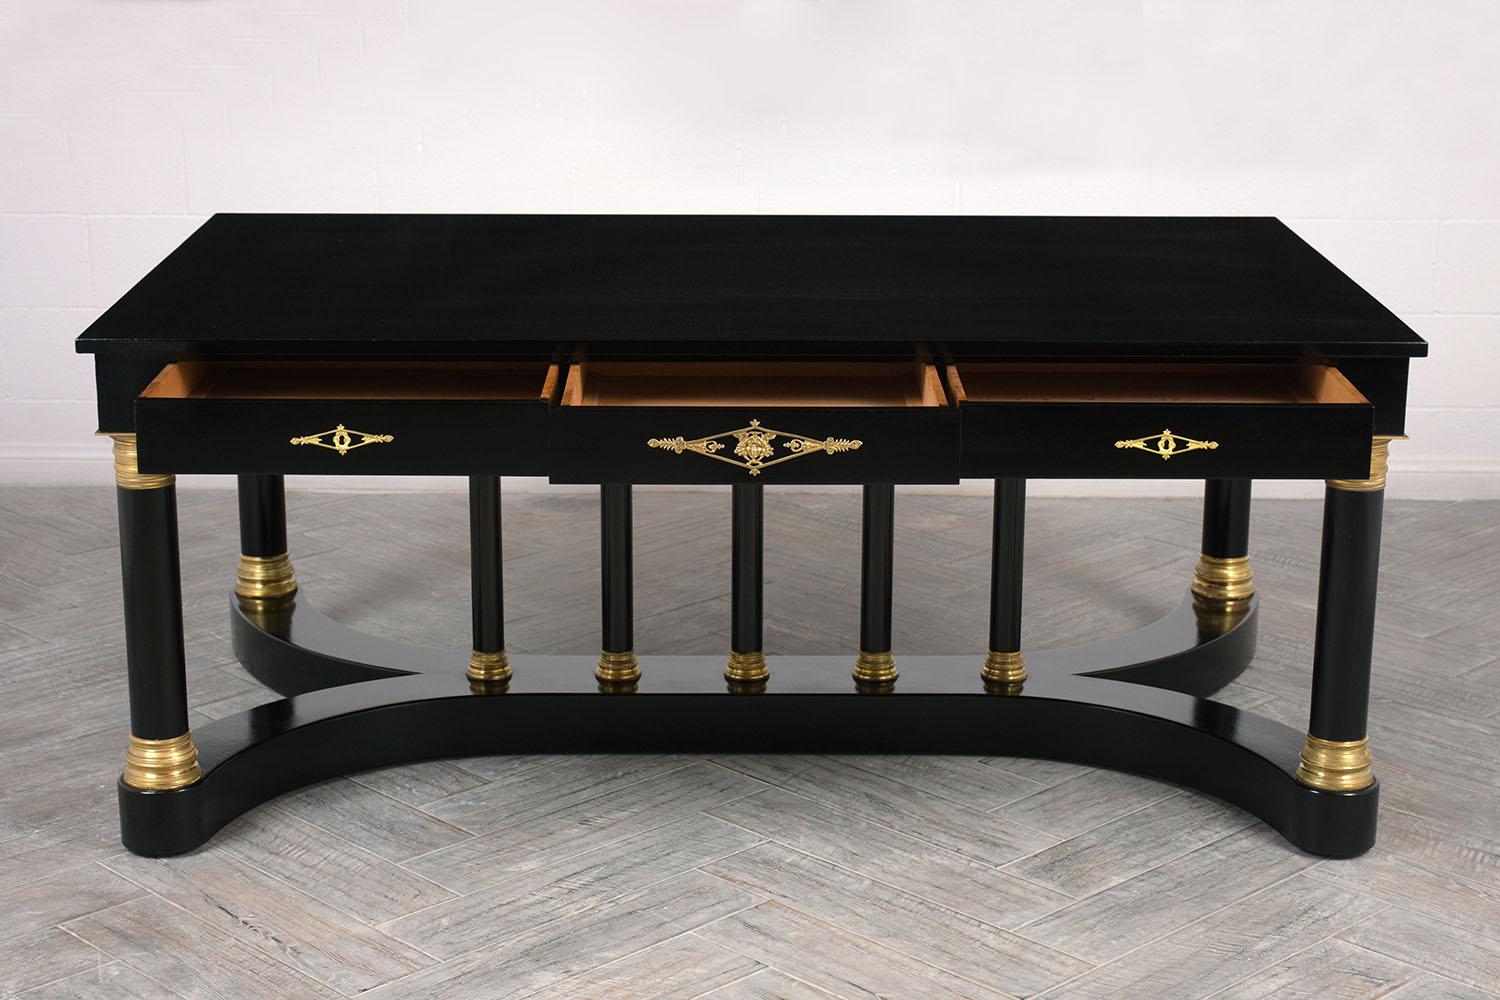 This 1900s French Empire-style partner desk is made of mahogany wood with an ebonized and lacquered finish. On each side of the desk there are three drawers with decorative brass keyhole plates. The pedestal base features a thick X-shaped Silhouette